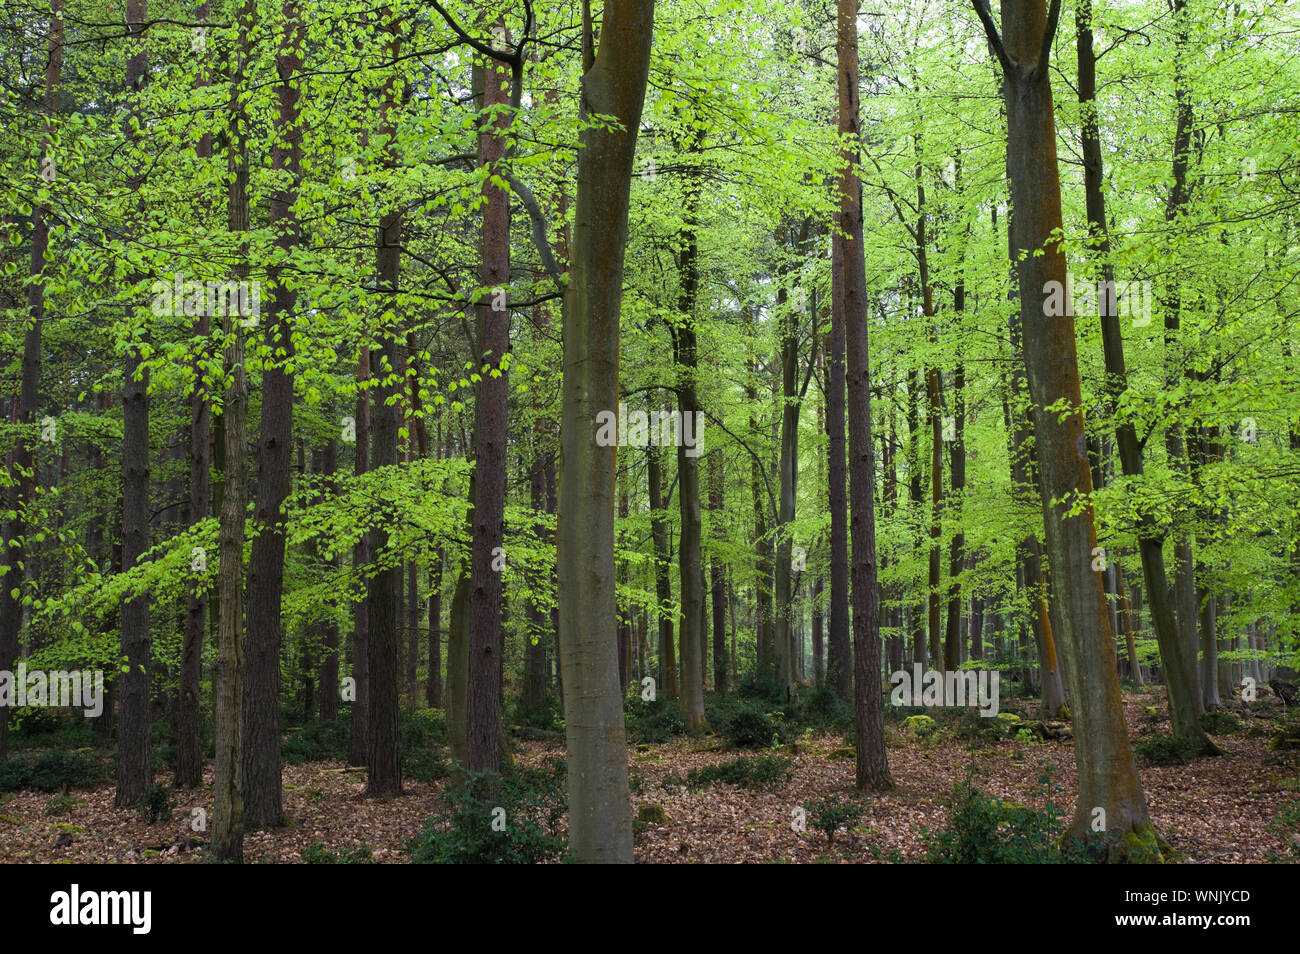 Fresh bright green spring growth leaves on the trees in Swinley Forest, England. Stock Photo